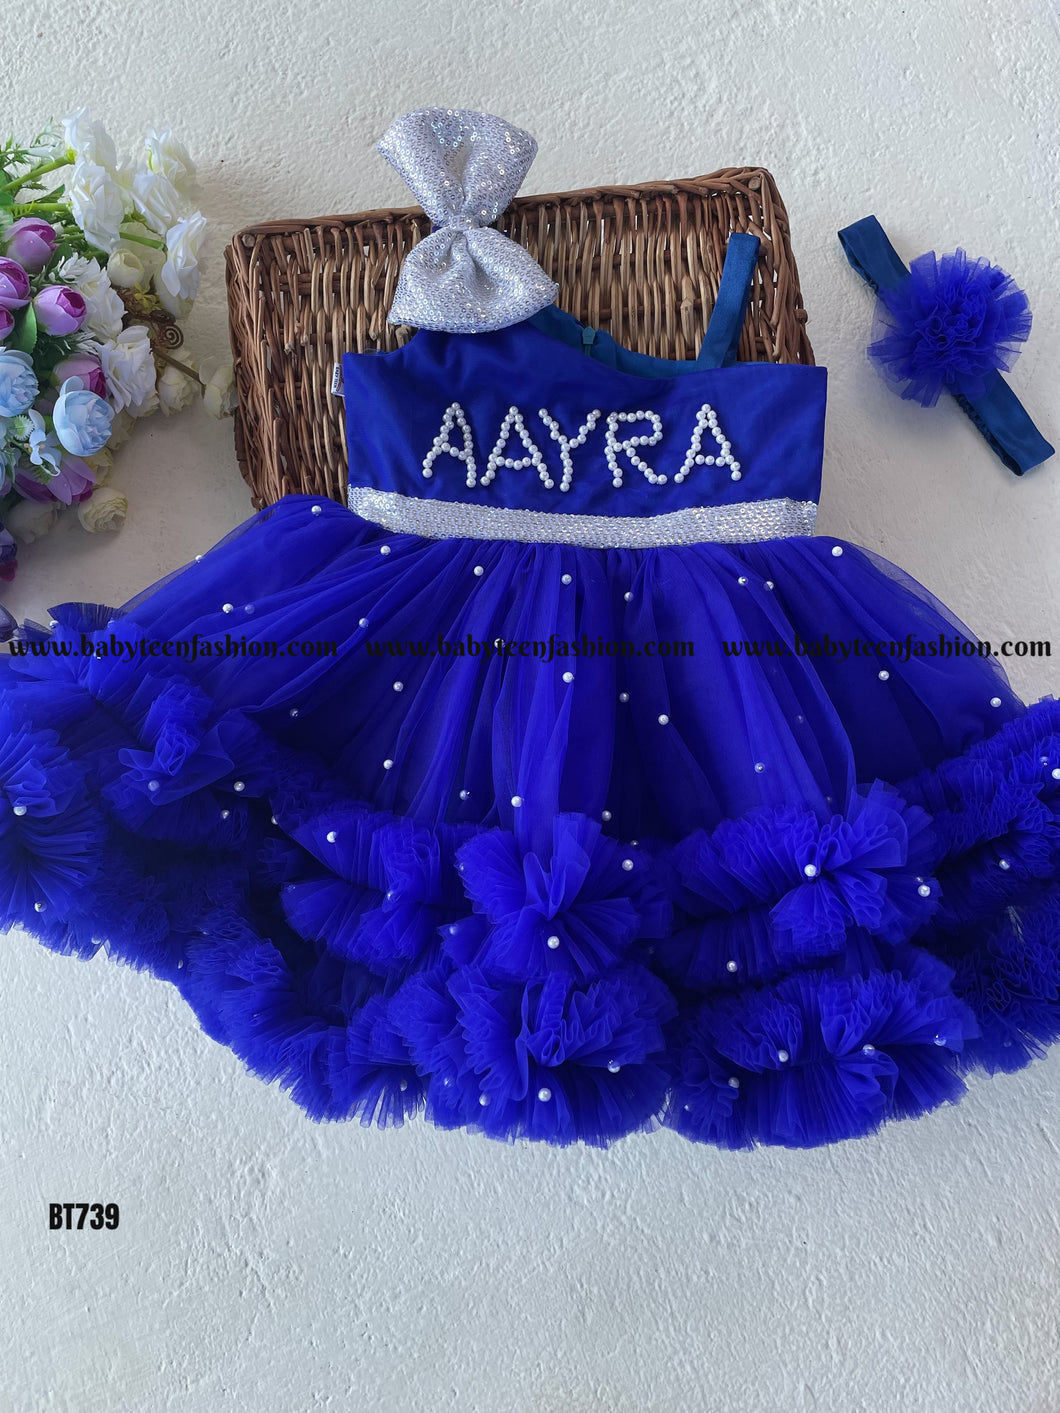 BT739 Customizable Enchanted Sapphire Gown – Your Little One's Fairytale Awaits